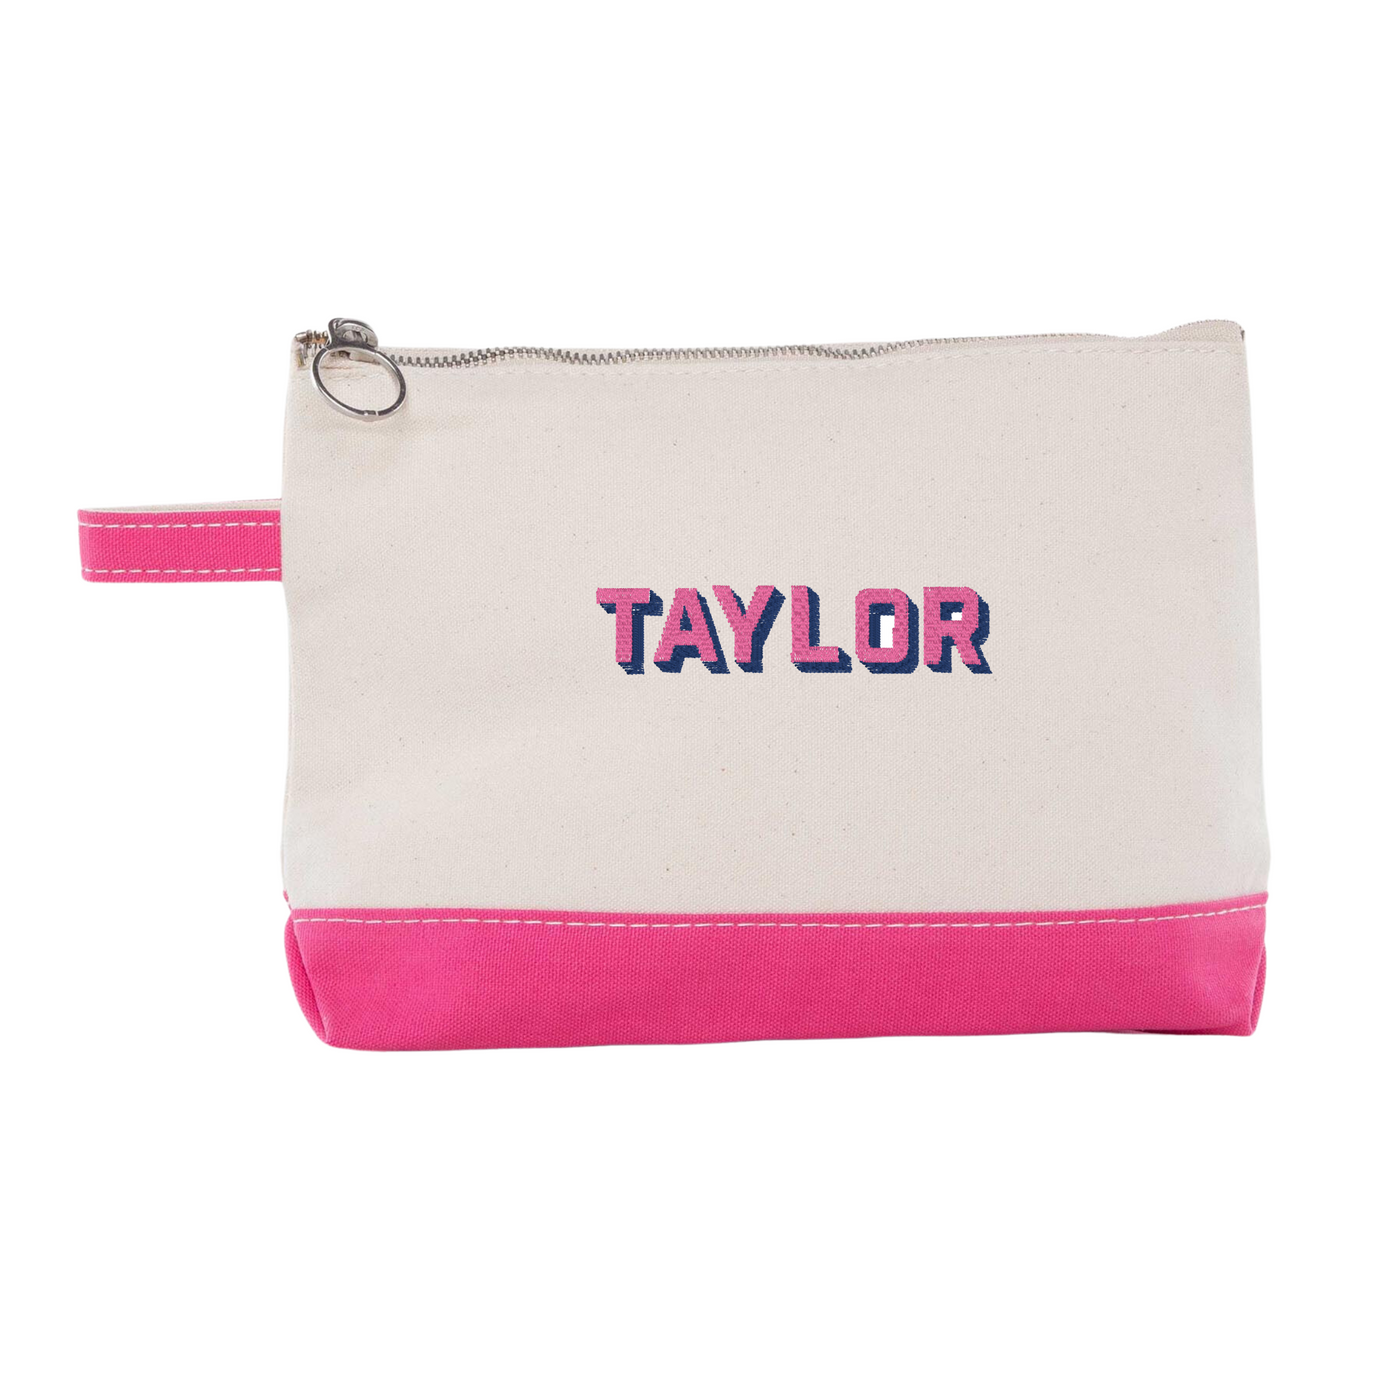 Personalized Cosmetic Bag - Barn Street Designs